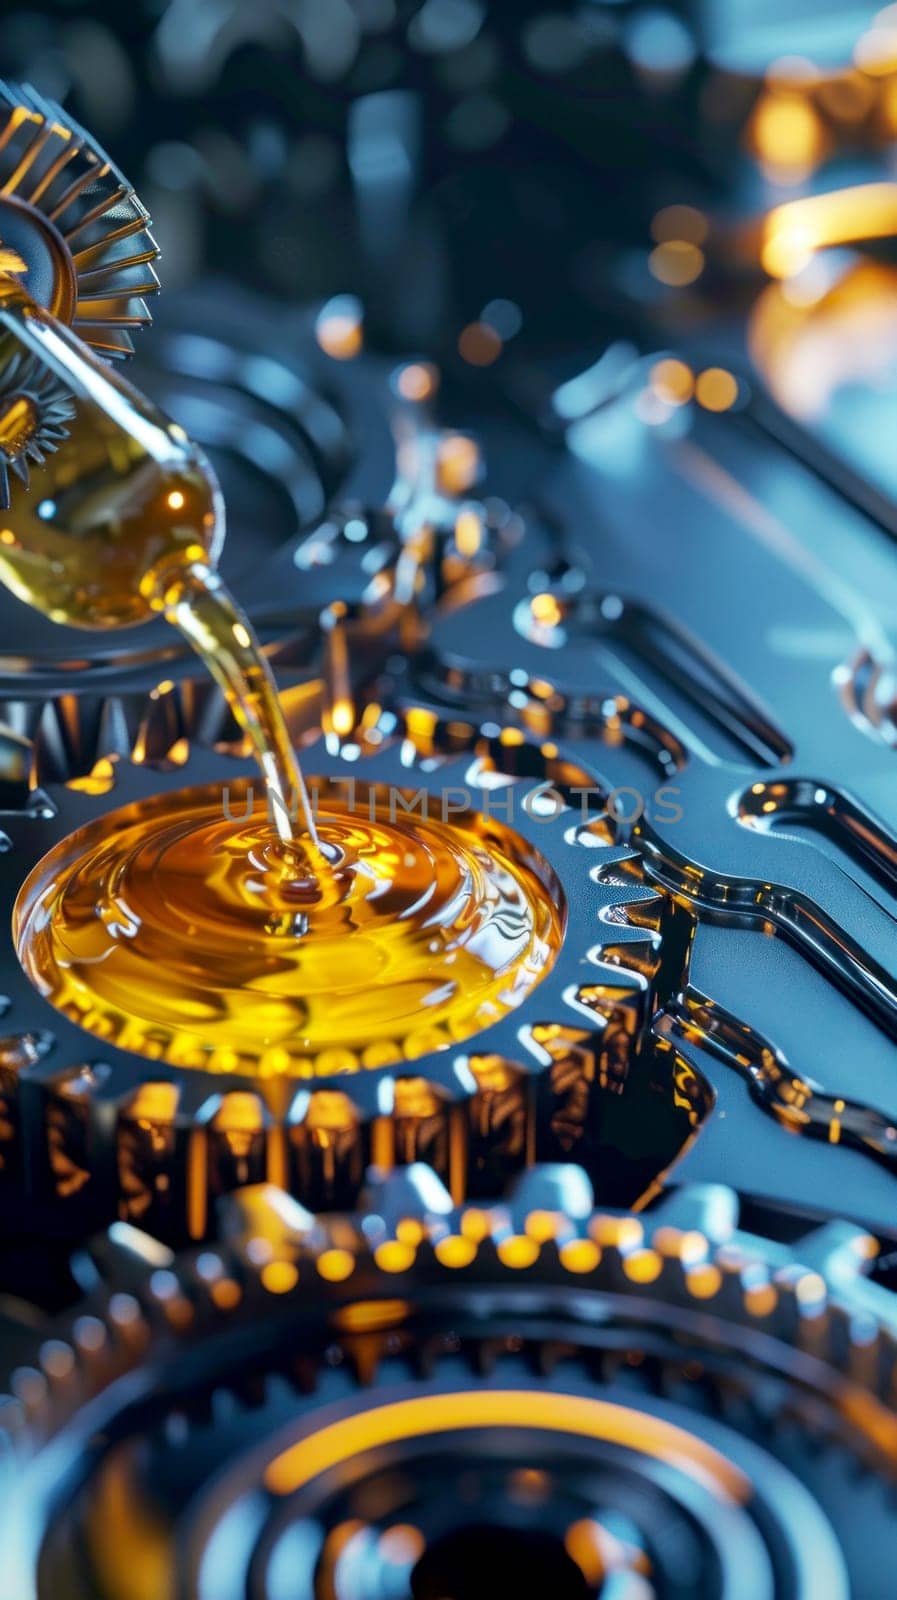 A machine is pouring a thick, golden liquid onto a gear by golfmerrymaker